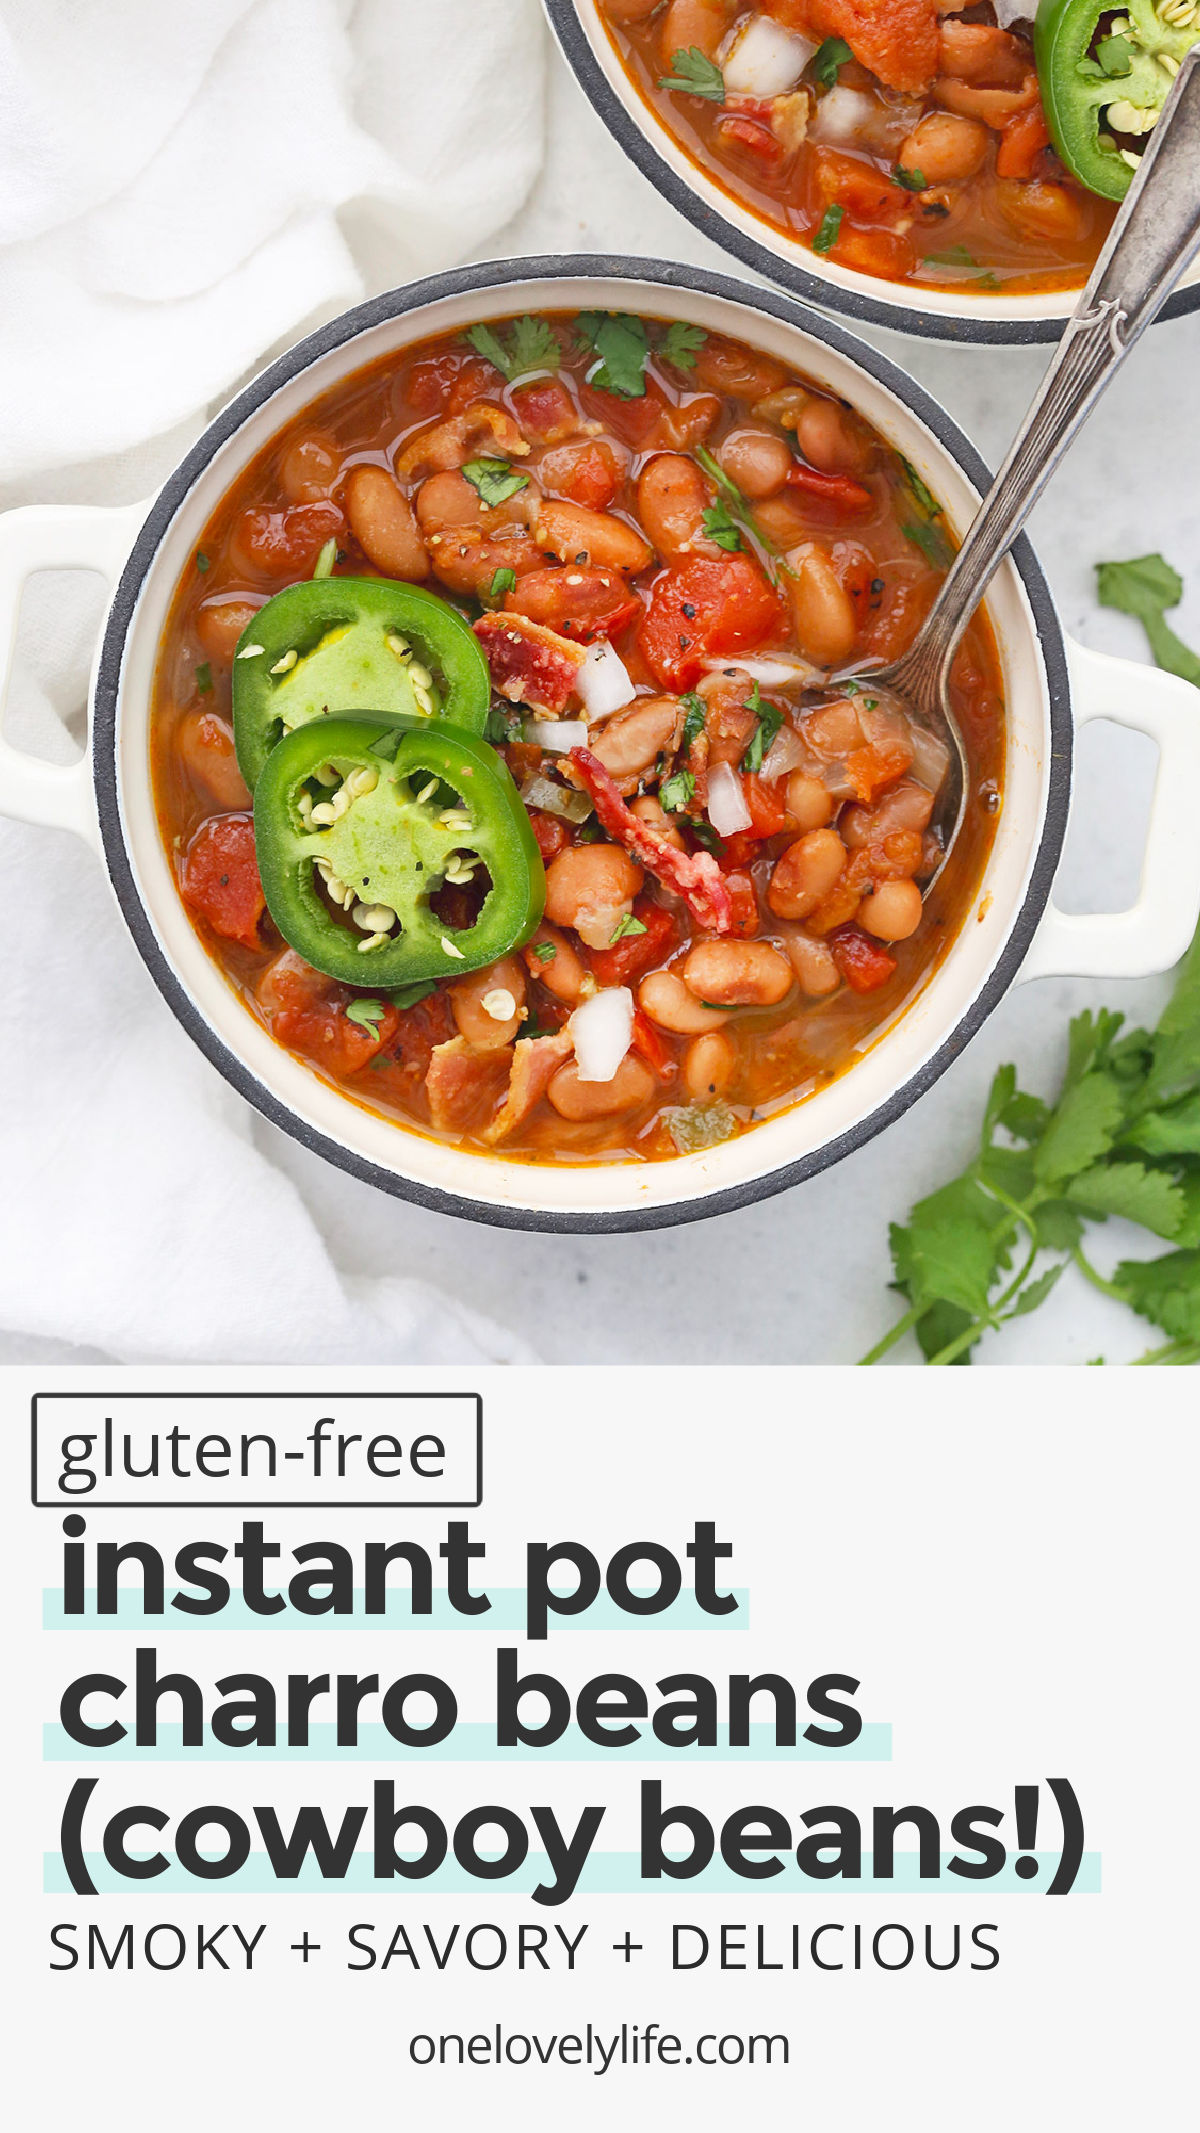 Instant Pot Charro Beans - These pressure cooker Mexican-style pinto beans are LOADED with flavor and perfect for all your Tex-Mex faves. (Gluten-Free + Easy!) // Mexican Beans // Charro Beans Recipe // Pressure Cooker Beans // Tex-Mex Recipe // Beans and Rice // instant pot pinto beans // instant pot beans